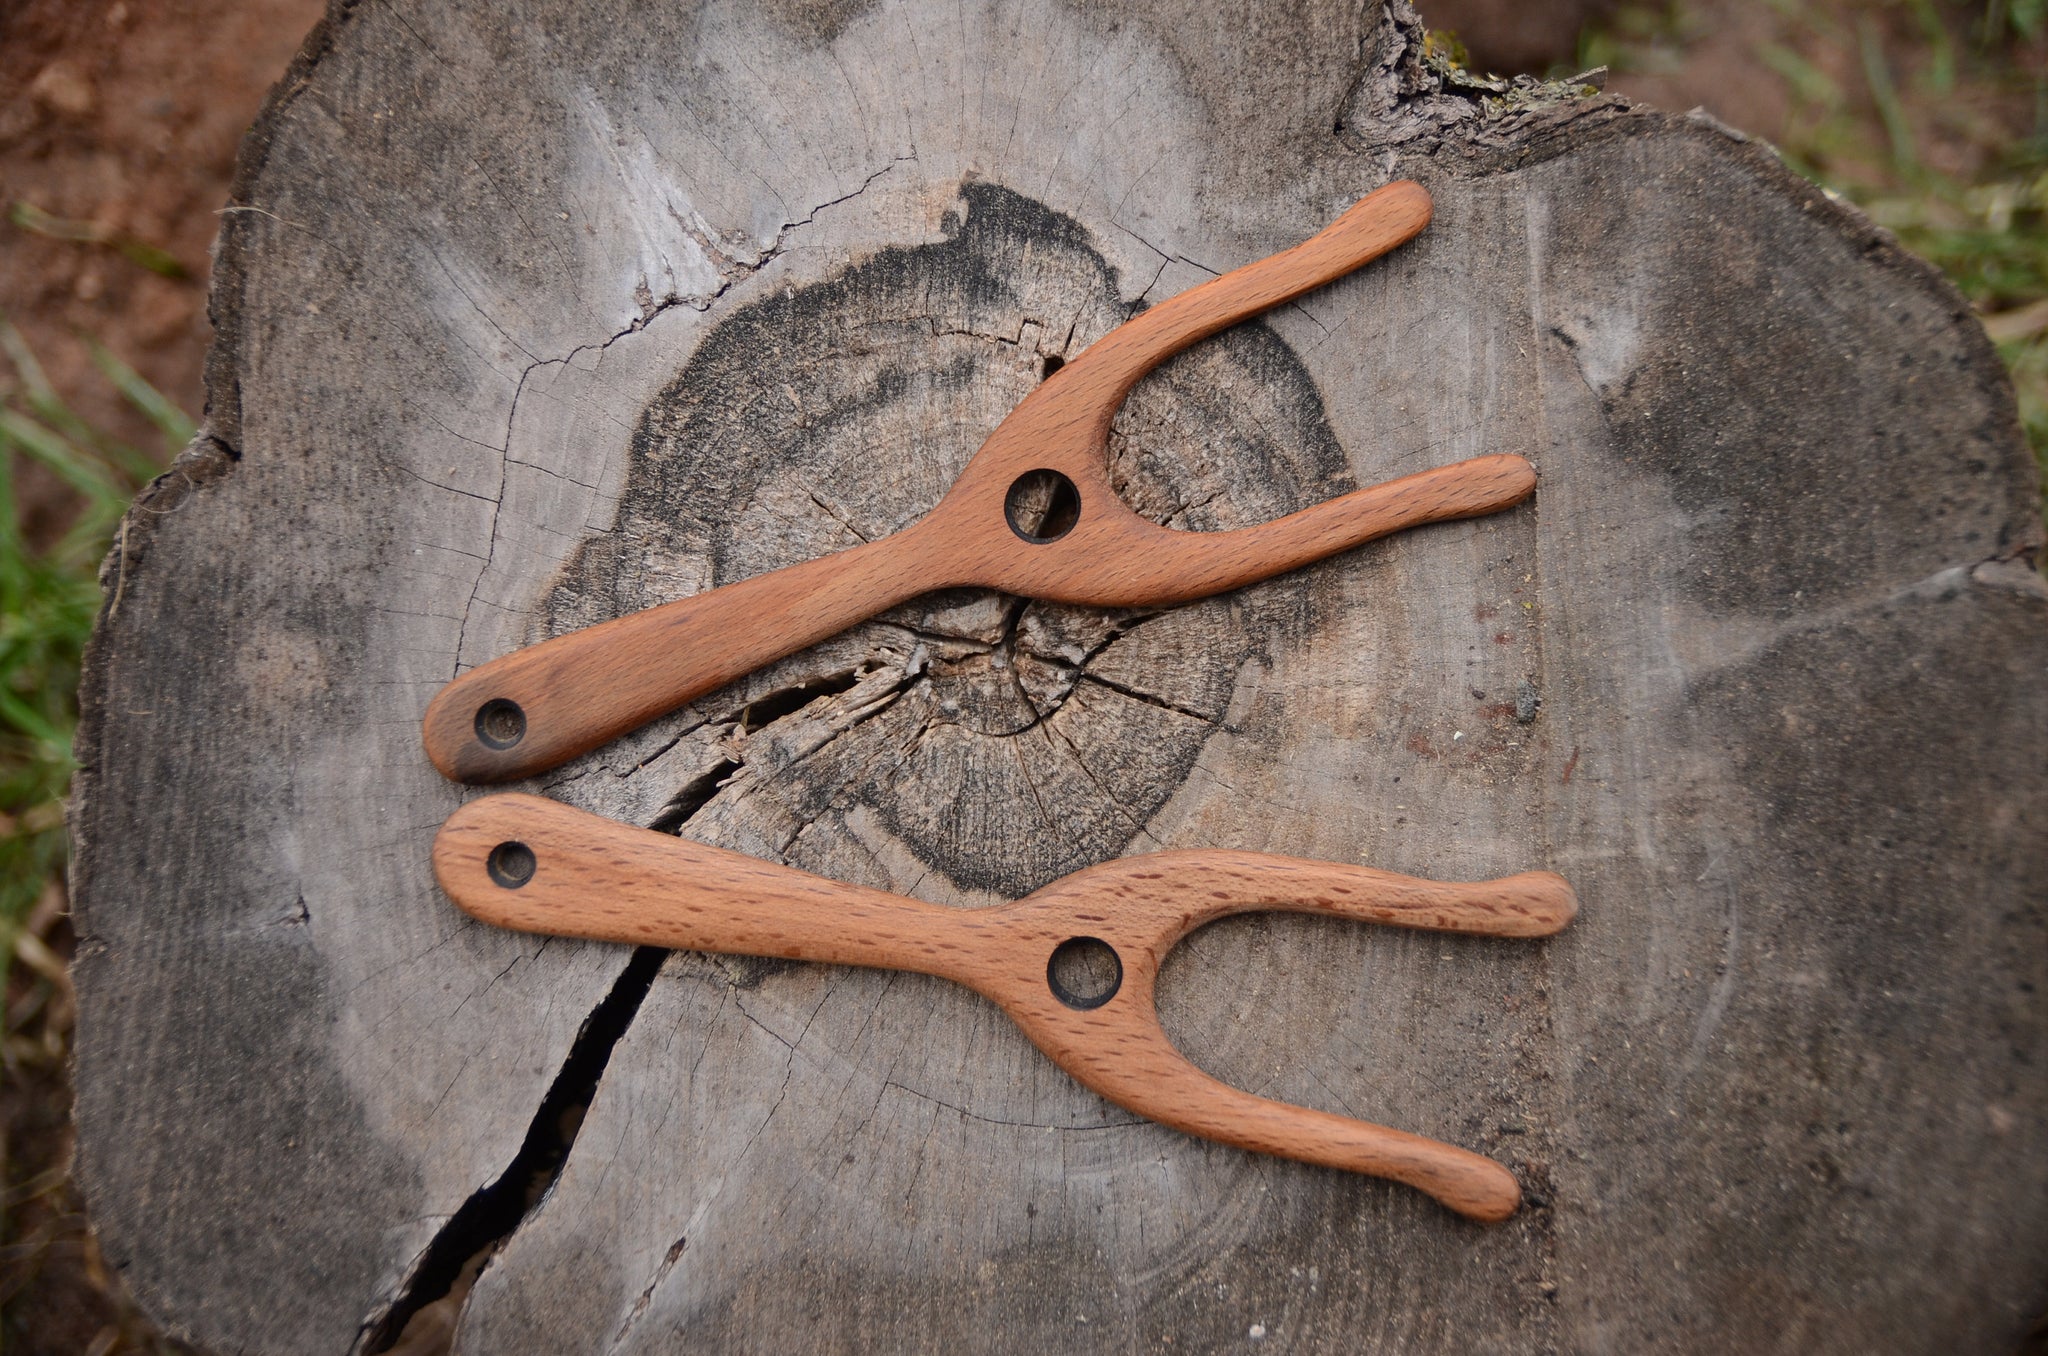 Hardwood Lucet - Cordmaking Tool - A Child's Dream